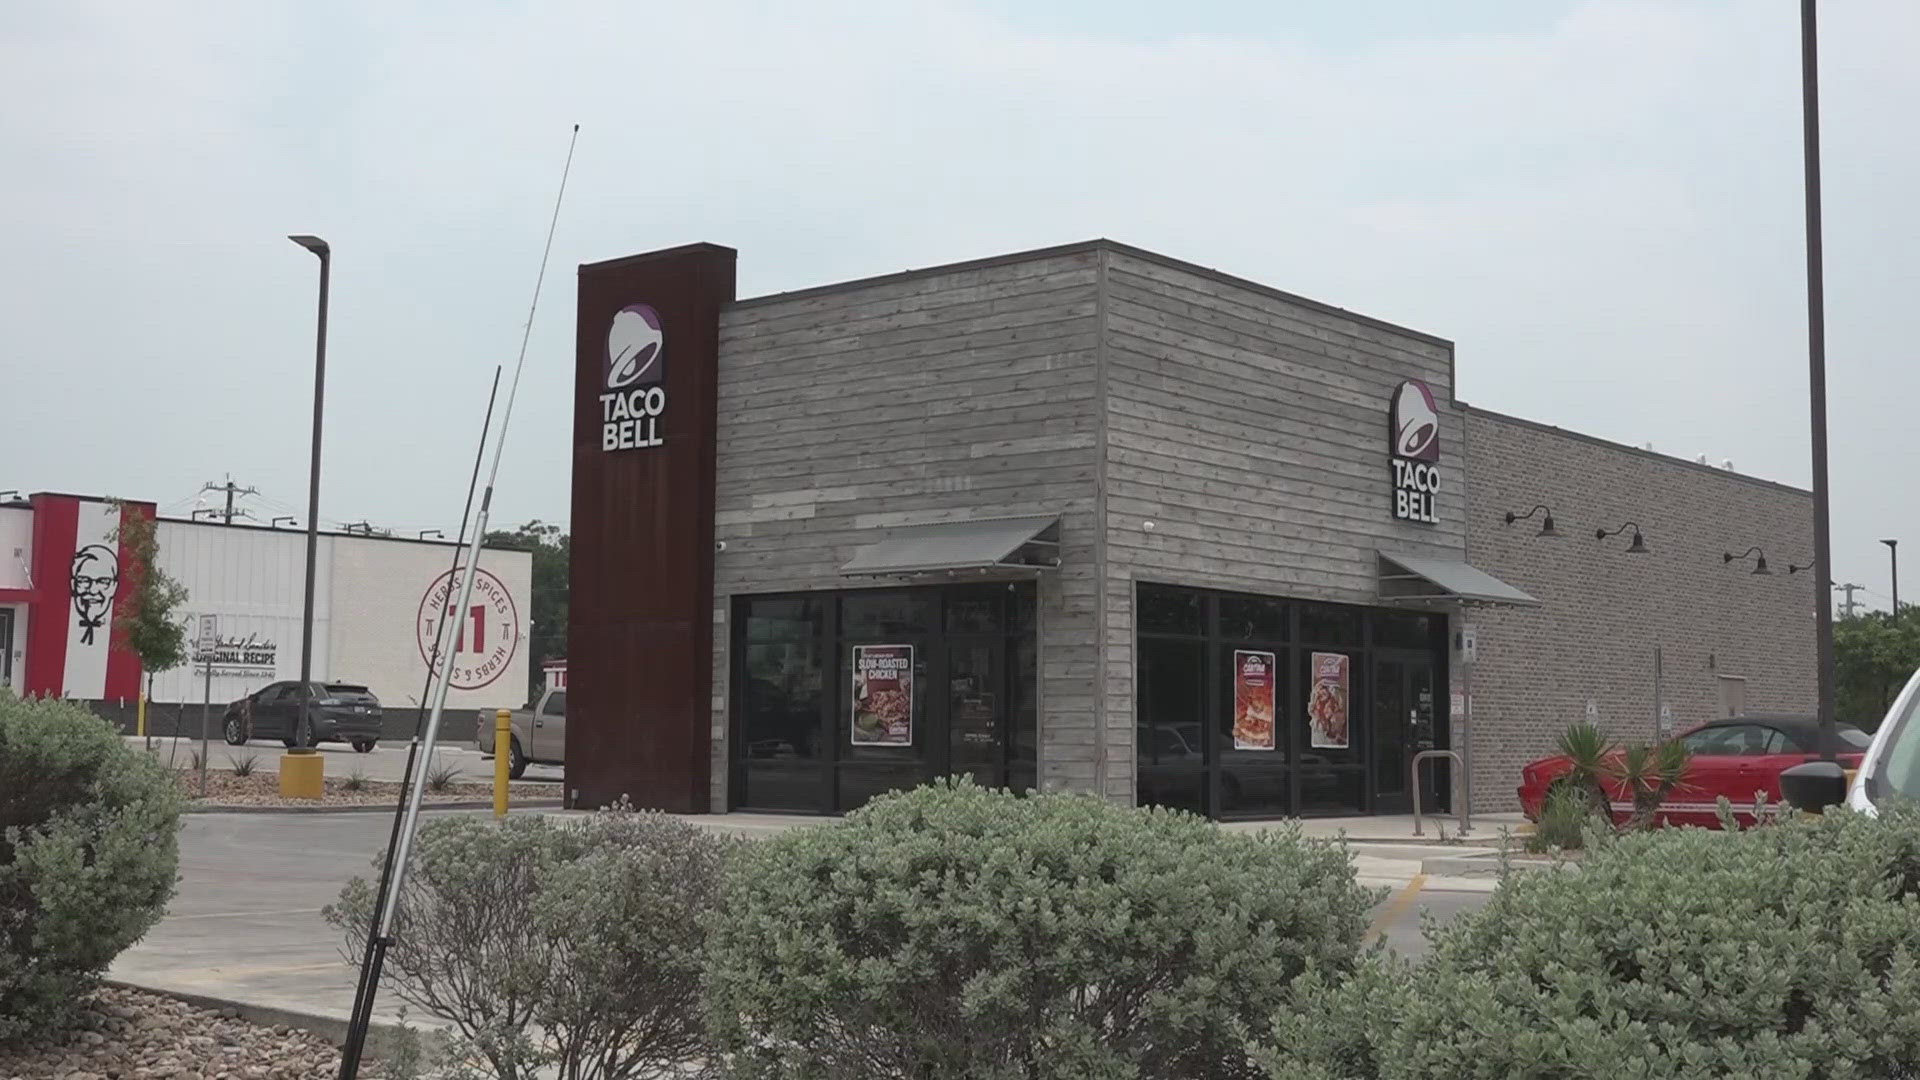 Woman arrested after she robbed a Taco Bell, police say